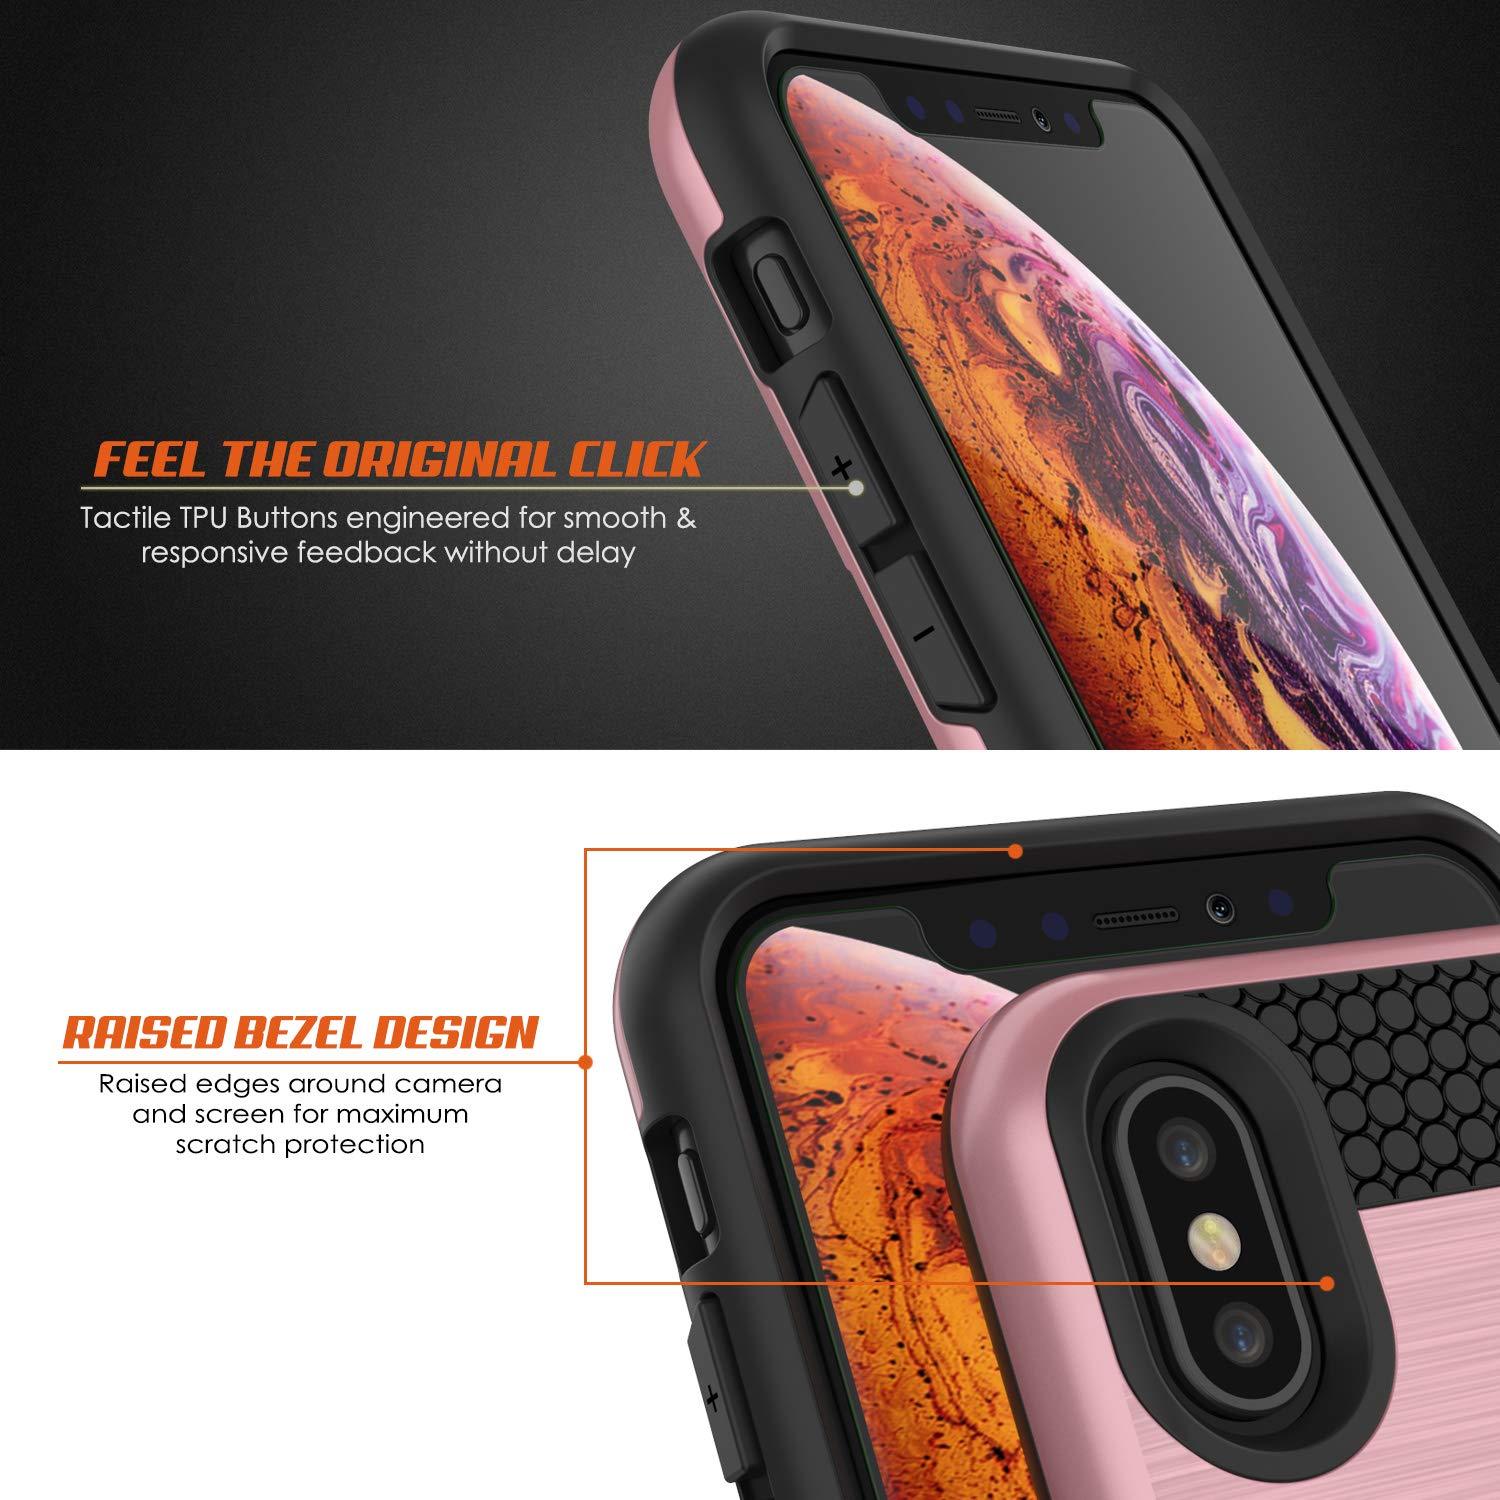 iPhone XS Case, PUNKcase [SLOT Series] Slim Fit Dual-Layer Armor Cover [Rose-Gold]